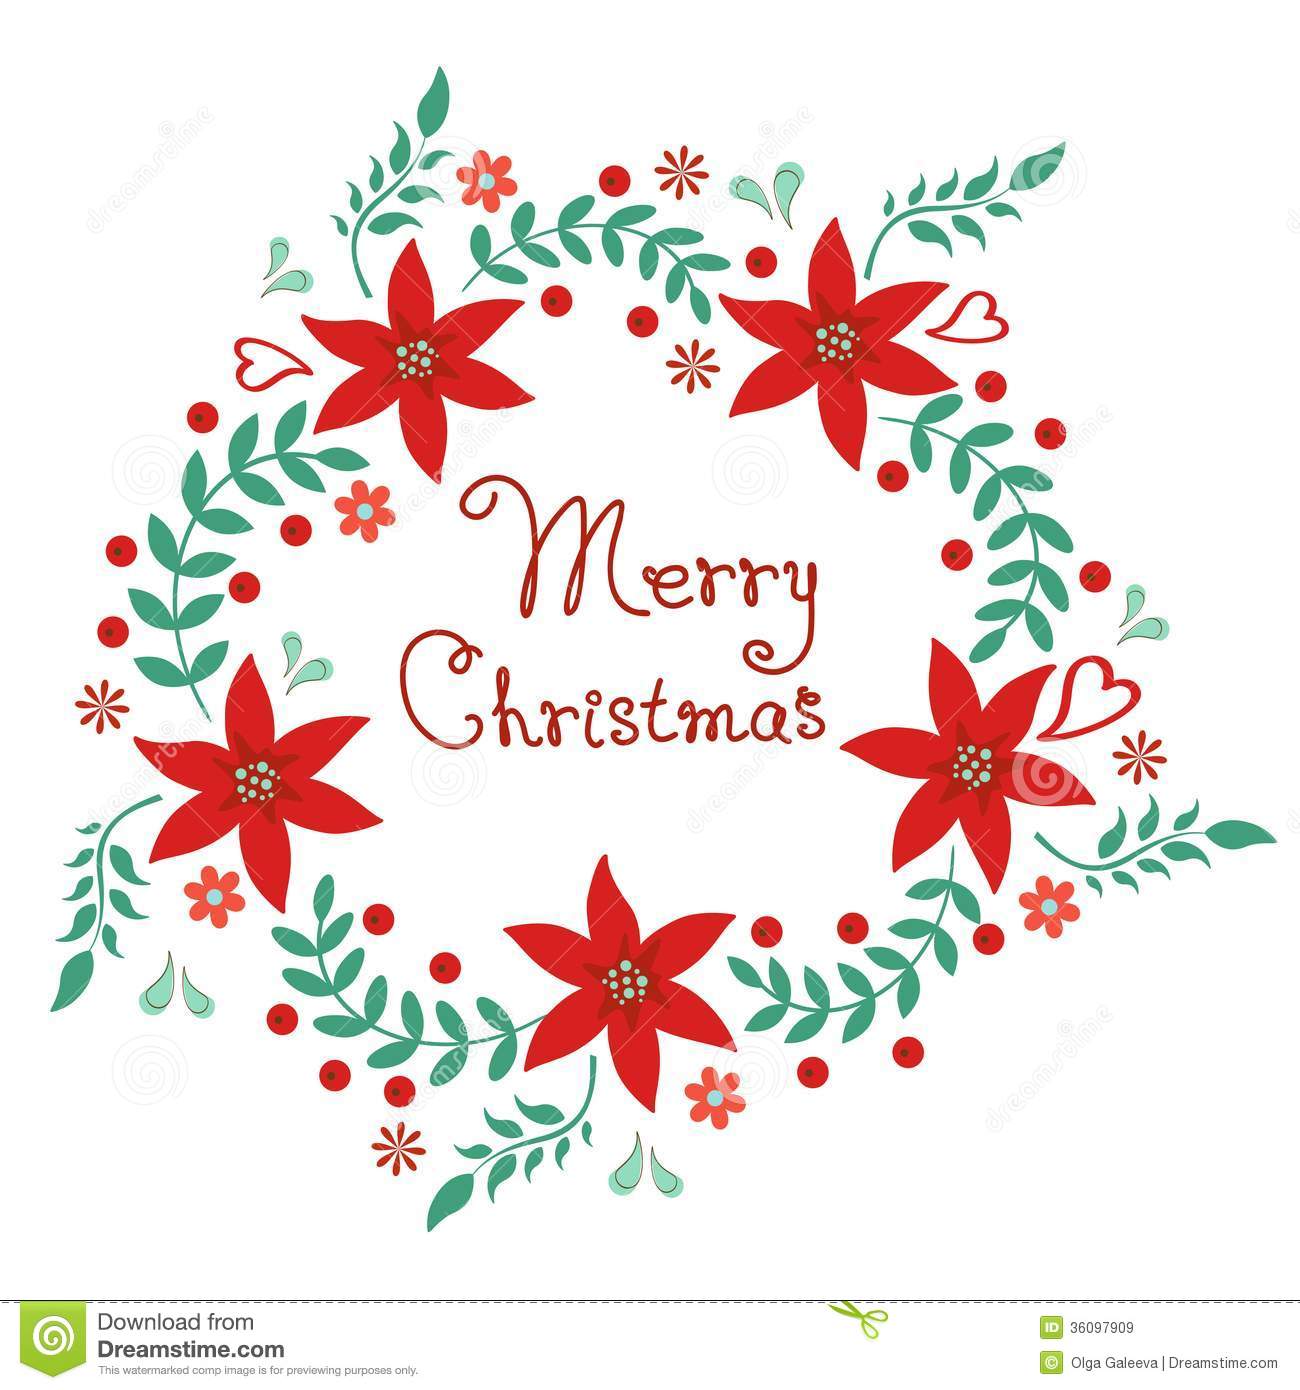 Merry Christmas Floral Wreath Royalty Free Stock Images   Image